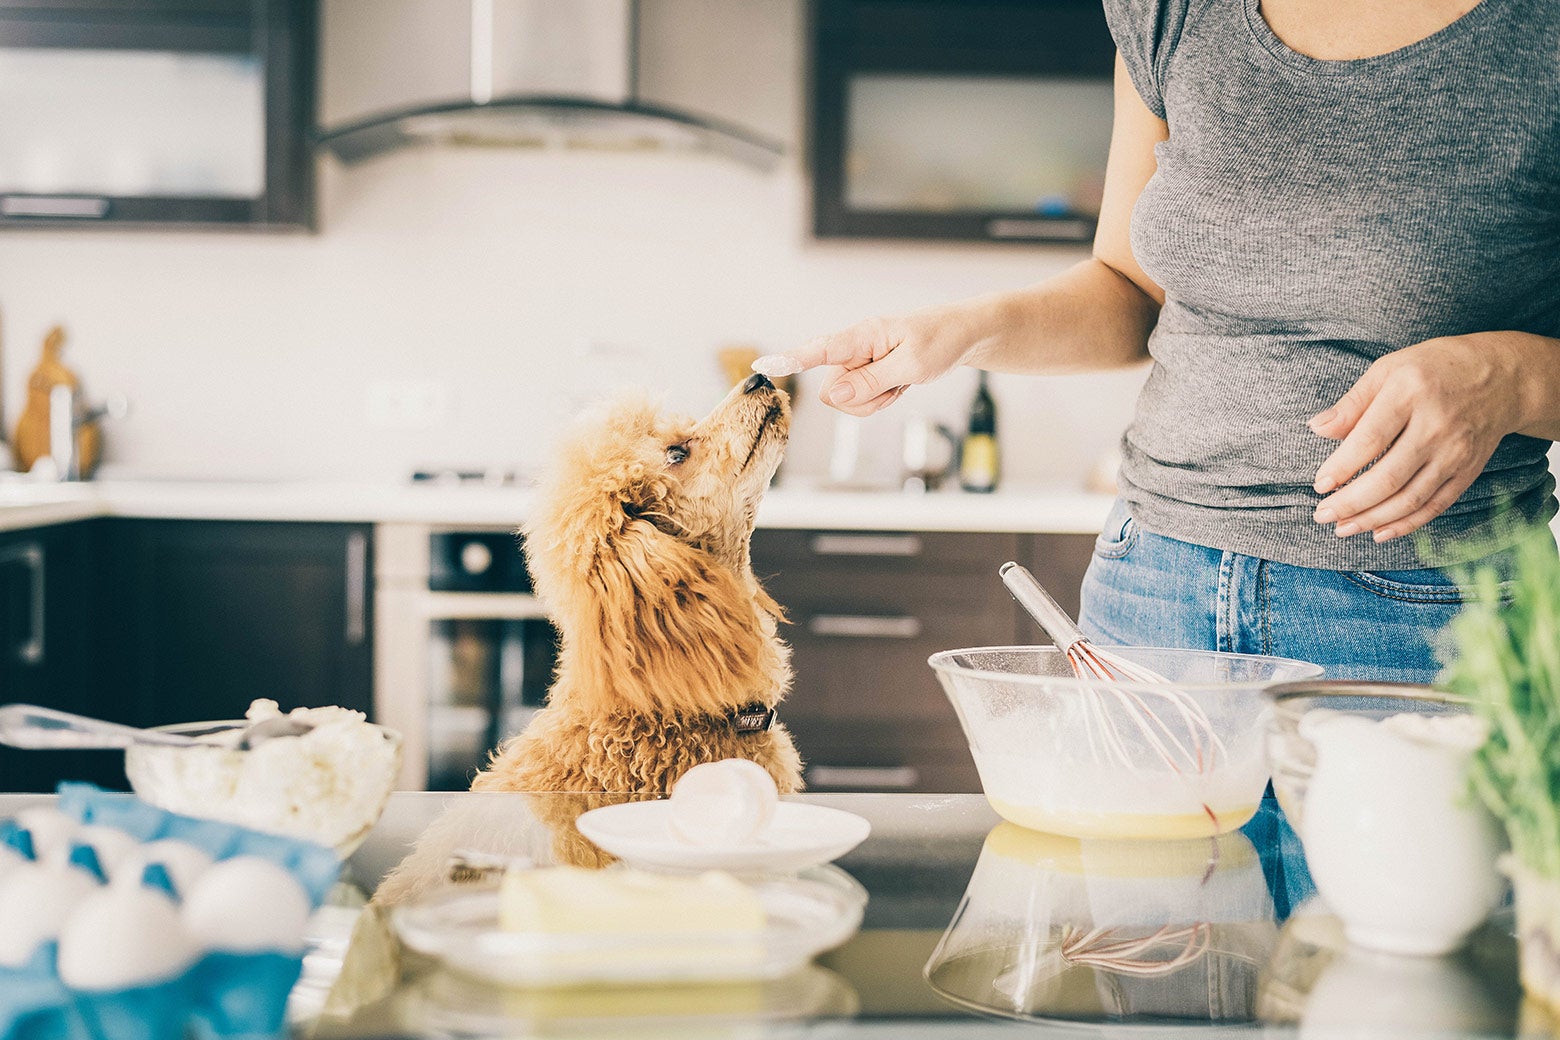 A woman baking in the kitchen with her dog.